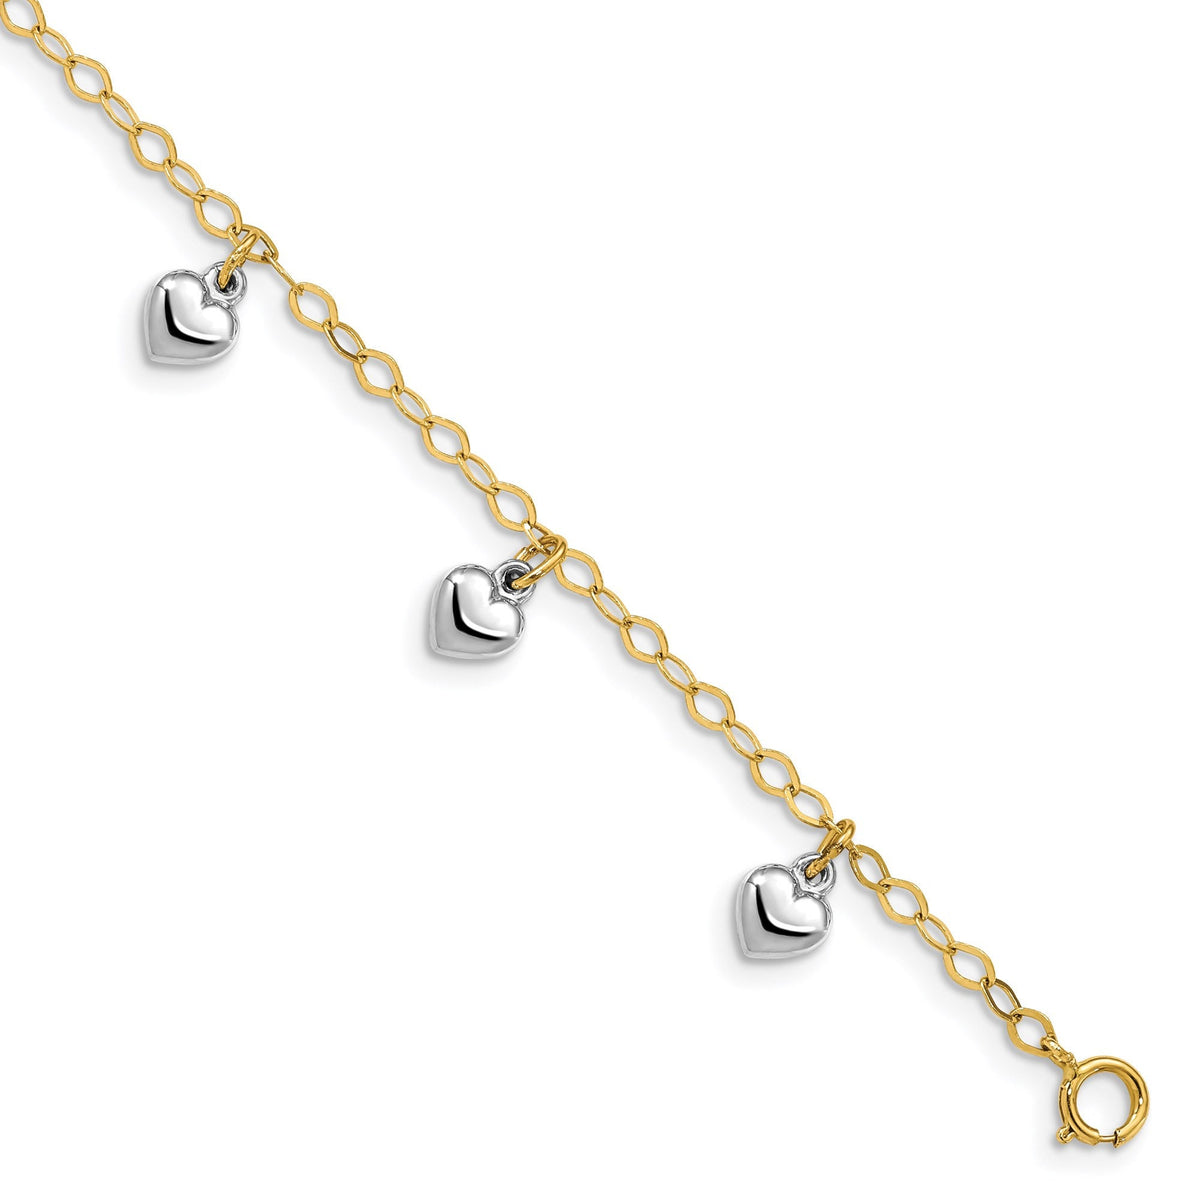 Baby to Toddler Size 14k Two Tone Heart Dangle Bracelet t - 5.5 inches Child Size 6 months to 4 years old - Gift Box Included